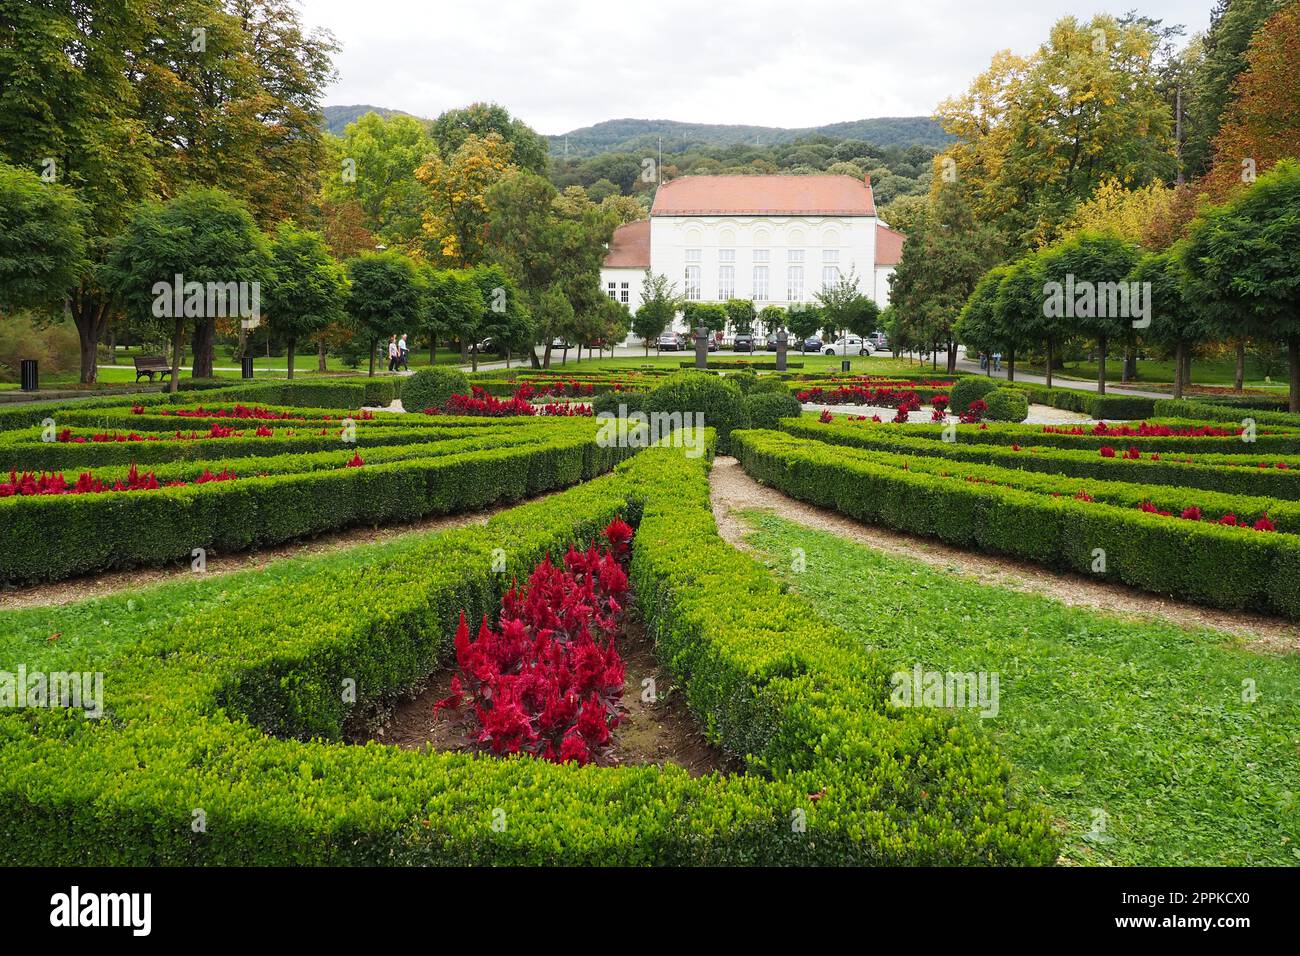 Banja Koviljaca, Serbia, Guchevo, Loznica Sept 30 2022 Rehabilitation center with sulfur and iron mineral waters. Landscape to the Kur-salon with grass, lawns, walking paths and flowers. Royal Palace. Stock Photo